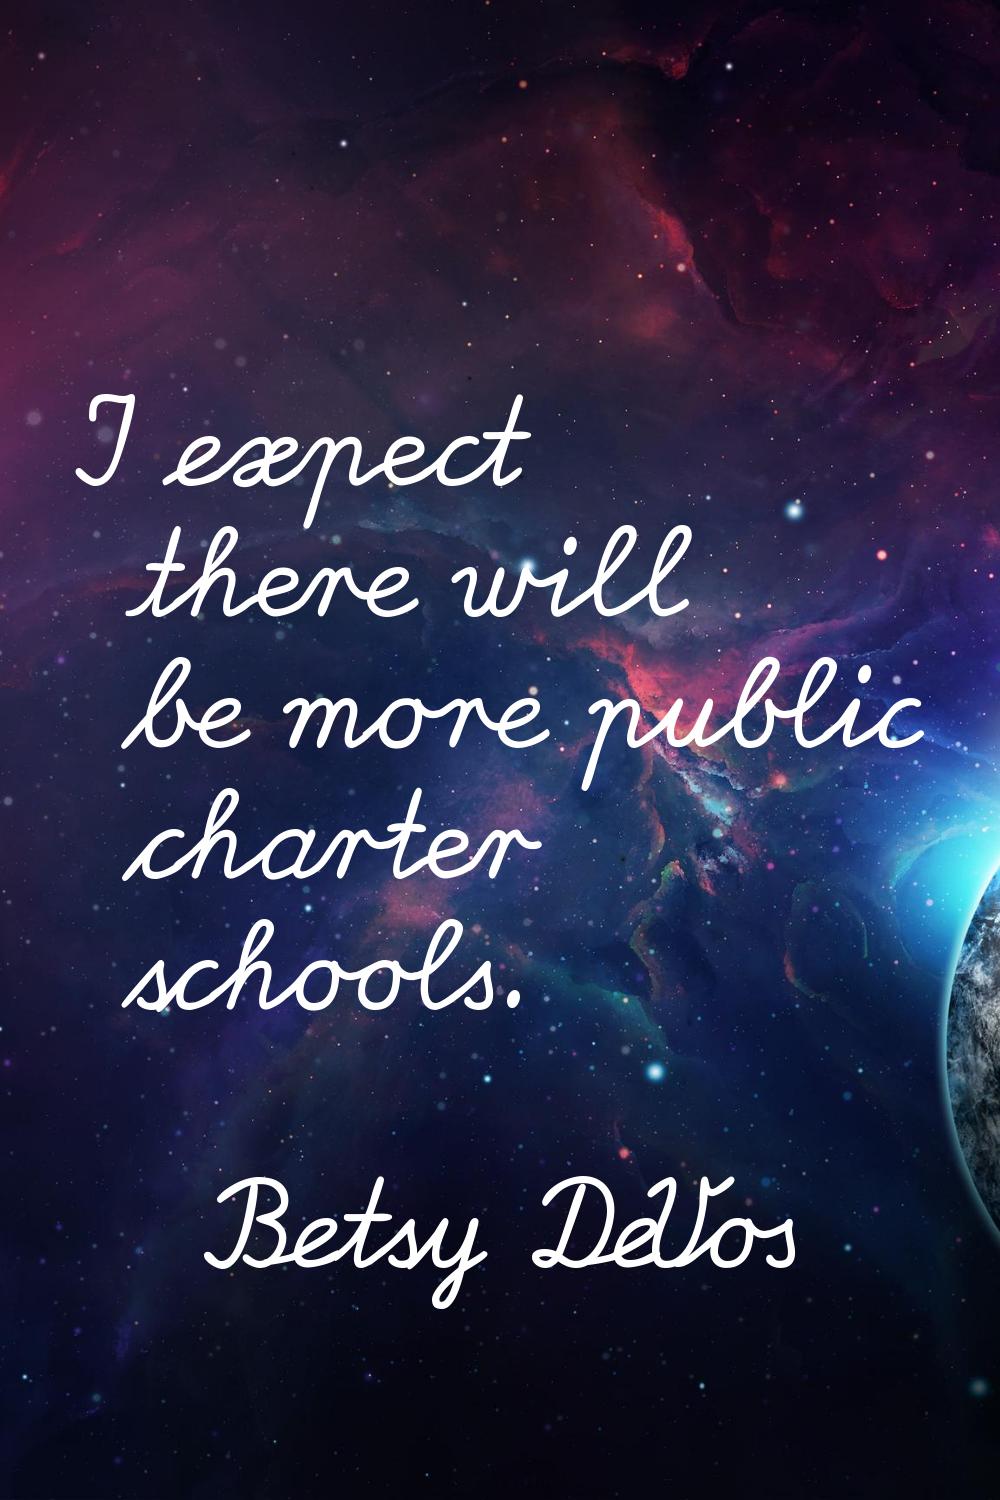 I expect there will be more public charter schools.